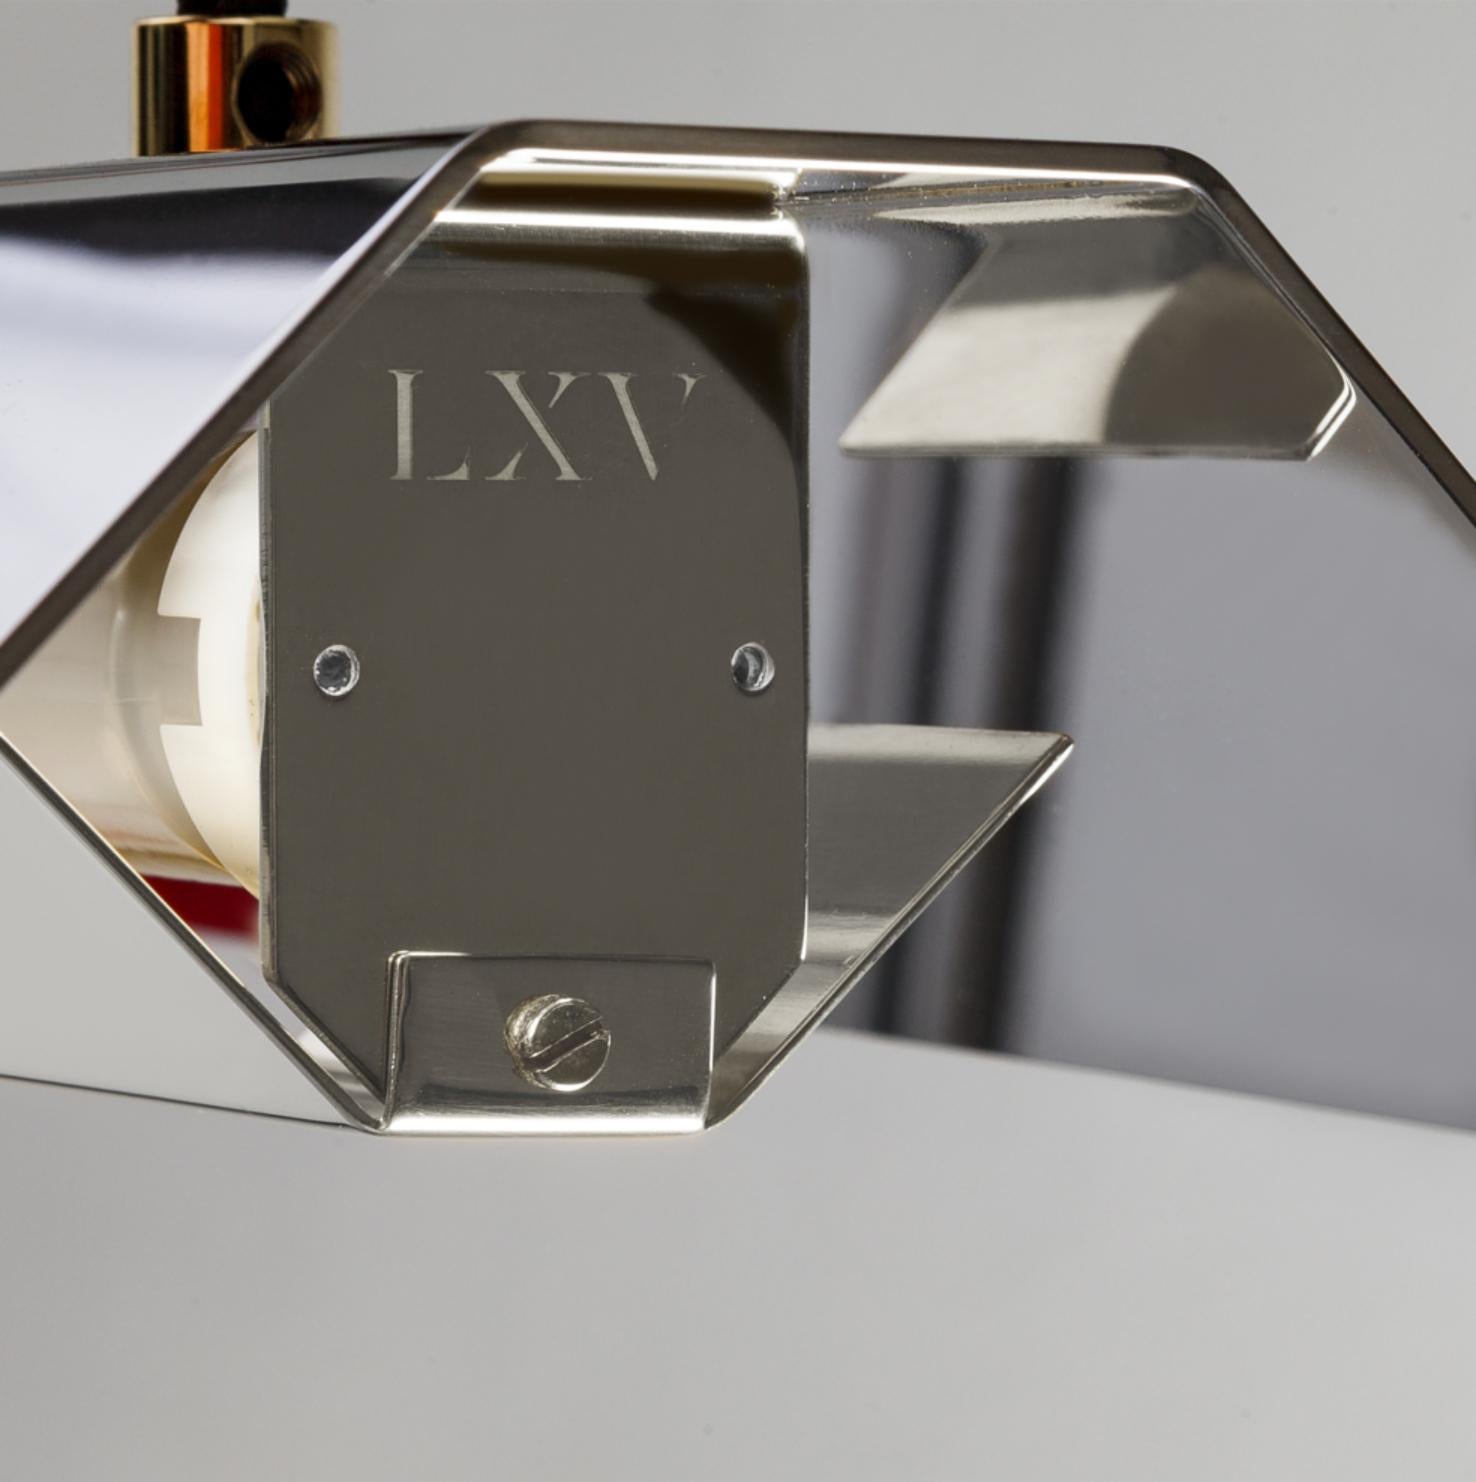 Large Misalliance inox suspended light by Lexavala
Dimensions: D 16 x W 130 x H 8 cm
Materials: stainless steel.

There are two lenghts of socket covers, extending over the LED. Two short are to be found in Suspended and Surface, and one long in